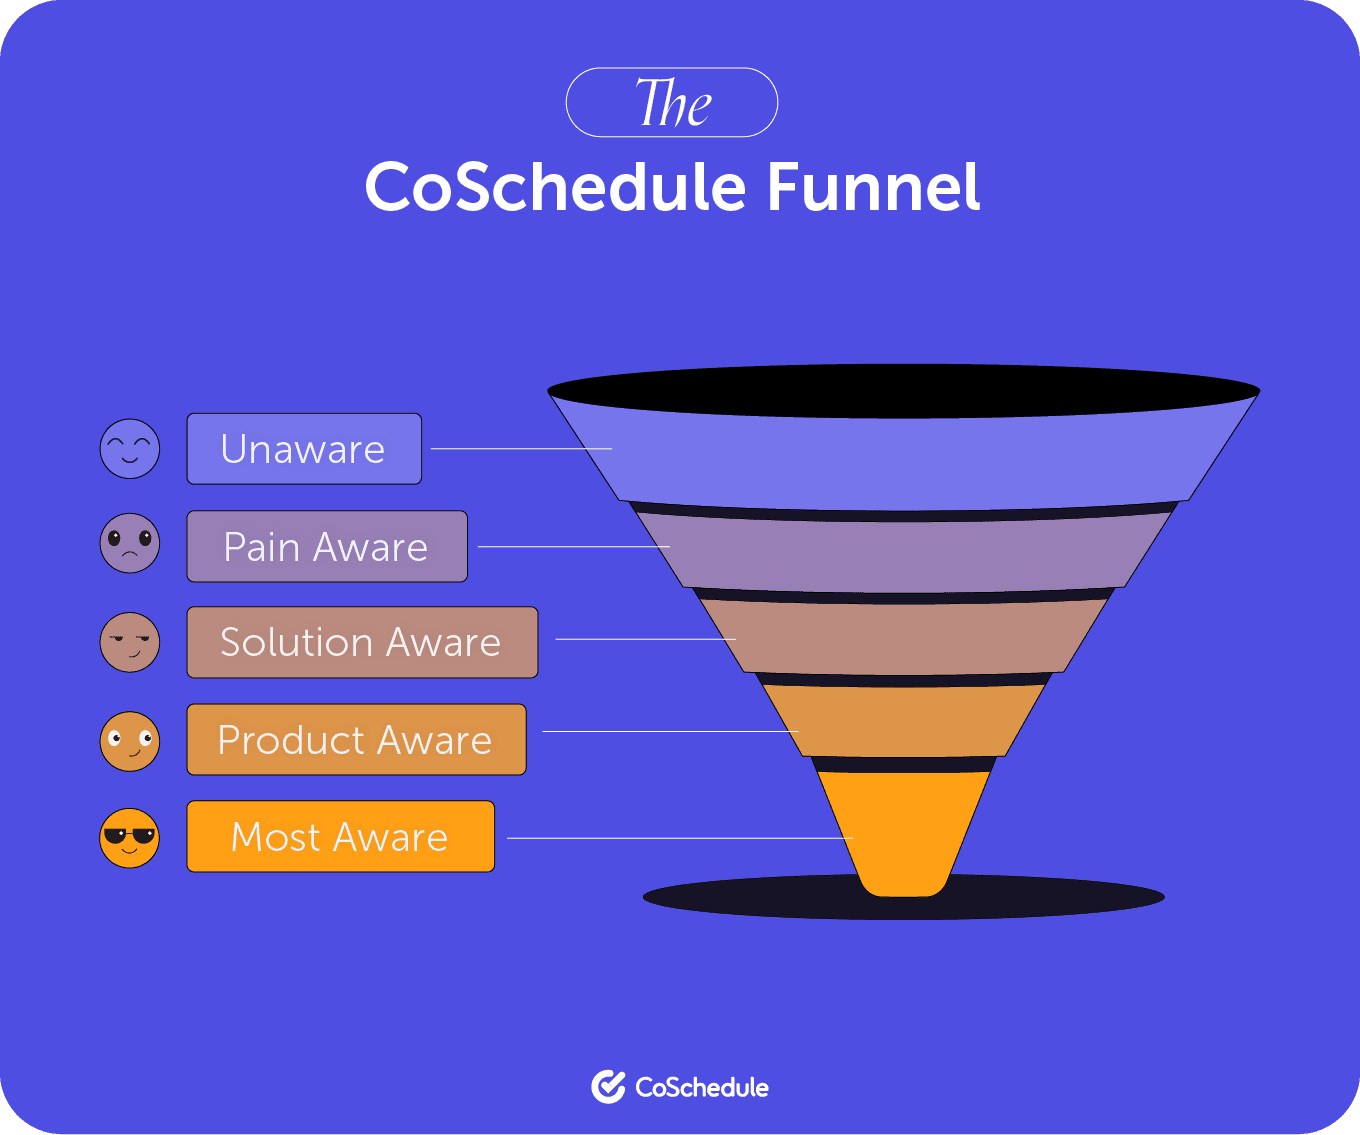 The coschedule marketing funnel